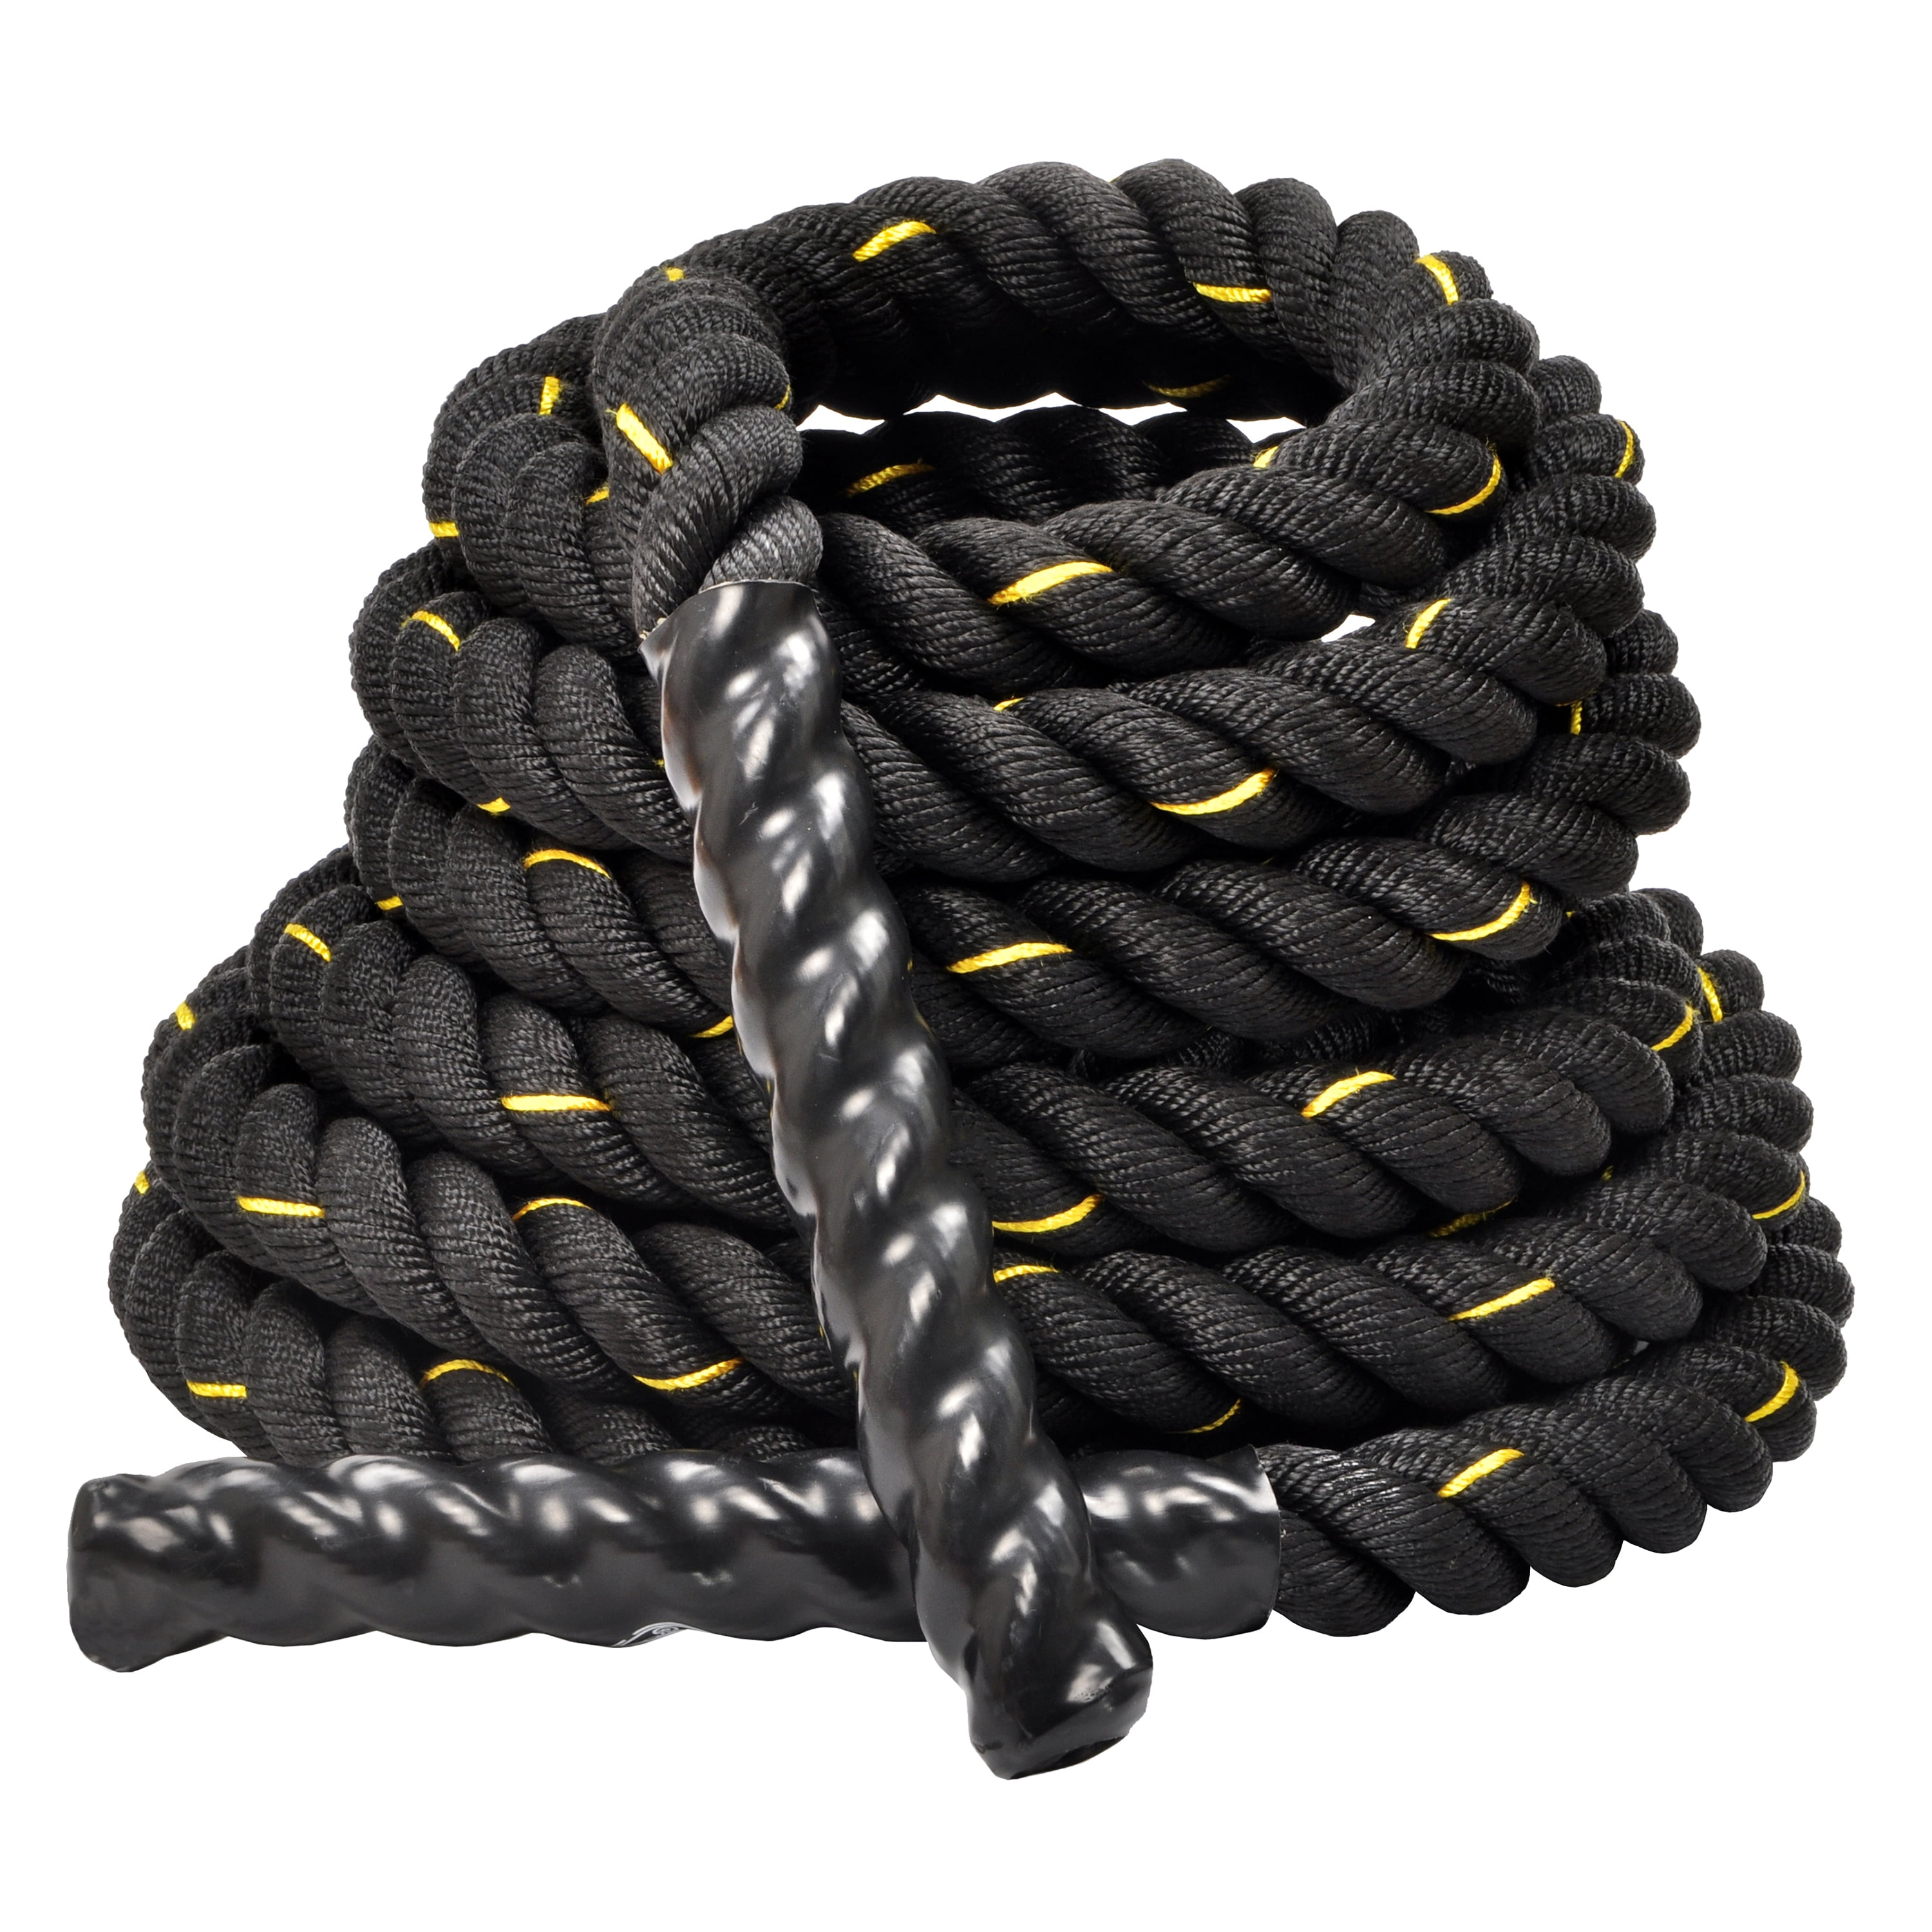 Details about   30ft Batlle Rope Workout Equipment Gym Fitness Equipment for home Workouts 